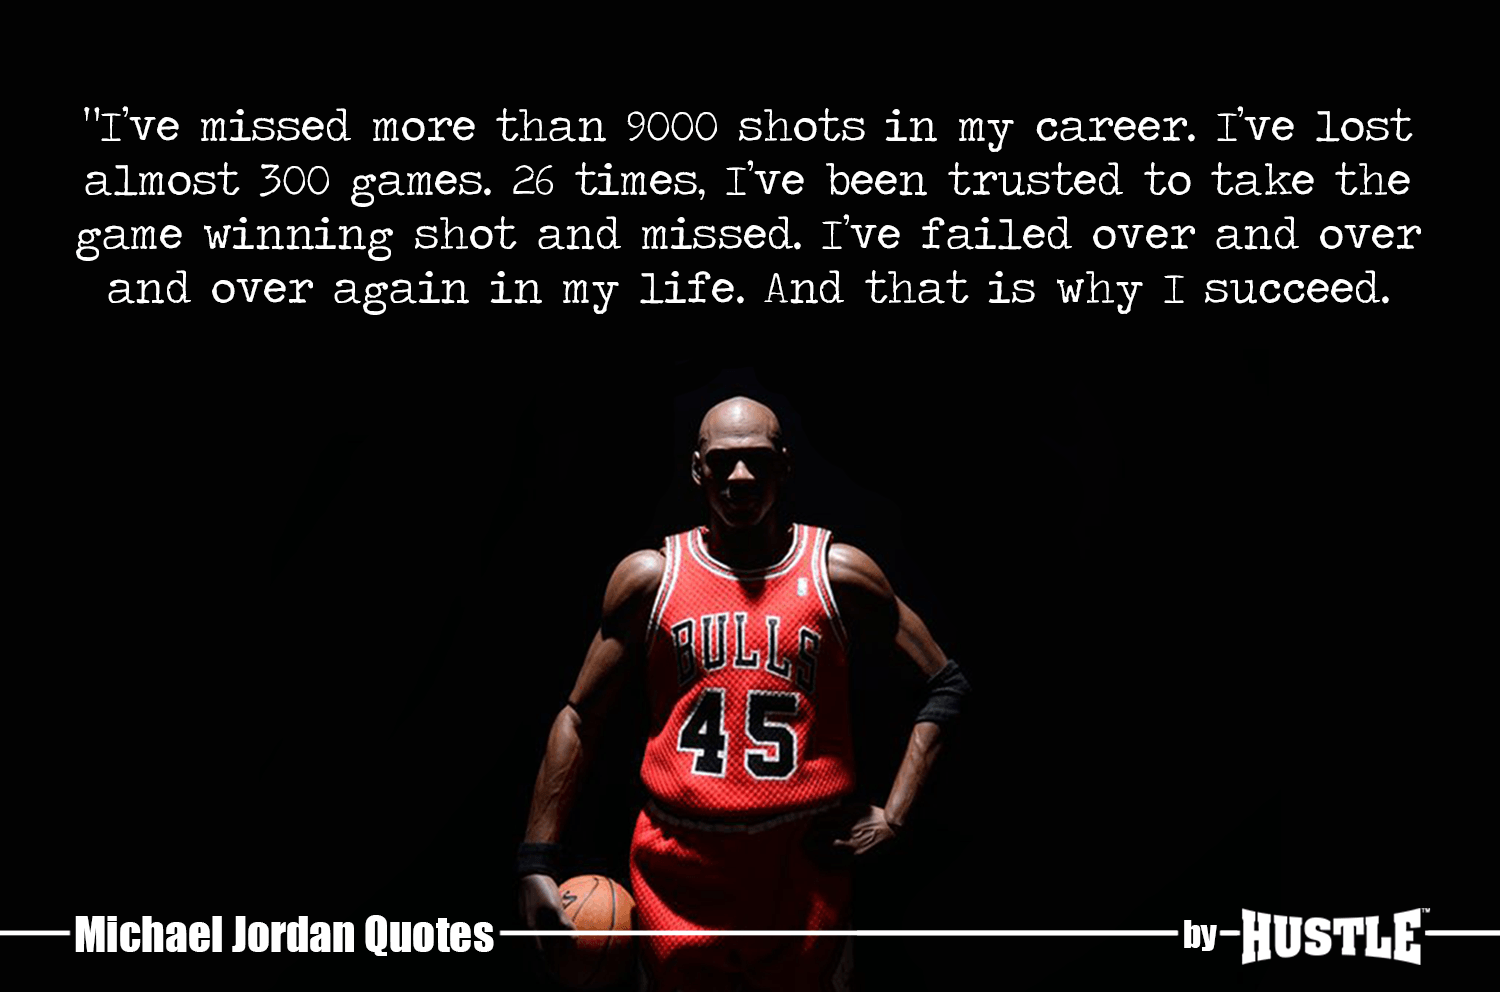 Quotes By Michael Jordan That Can Bring Huge Change In Your Life